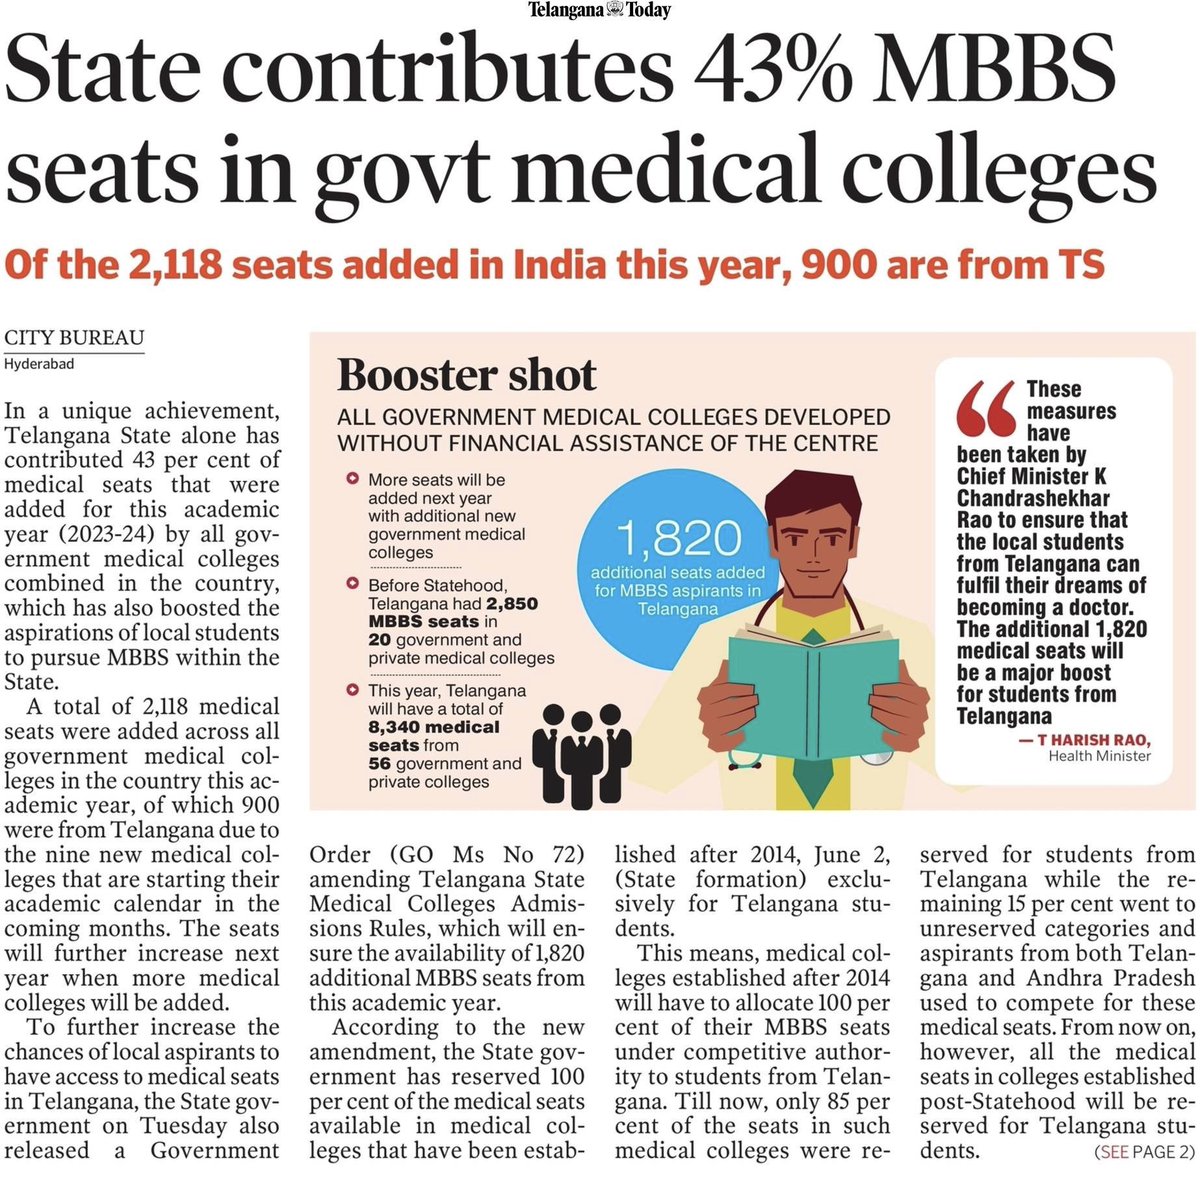 #TelanganaModel 👇 

• 44% of total IT jobs created in country in 2023 are from Telangana 

• 43% of MBBS seats added in country in 2023 are from Telangana 

These numbers speak volumes about #TSGovt’s unwavering commitment towards progress & development 👏